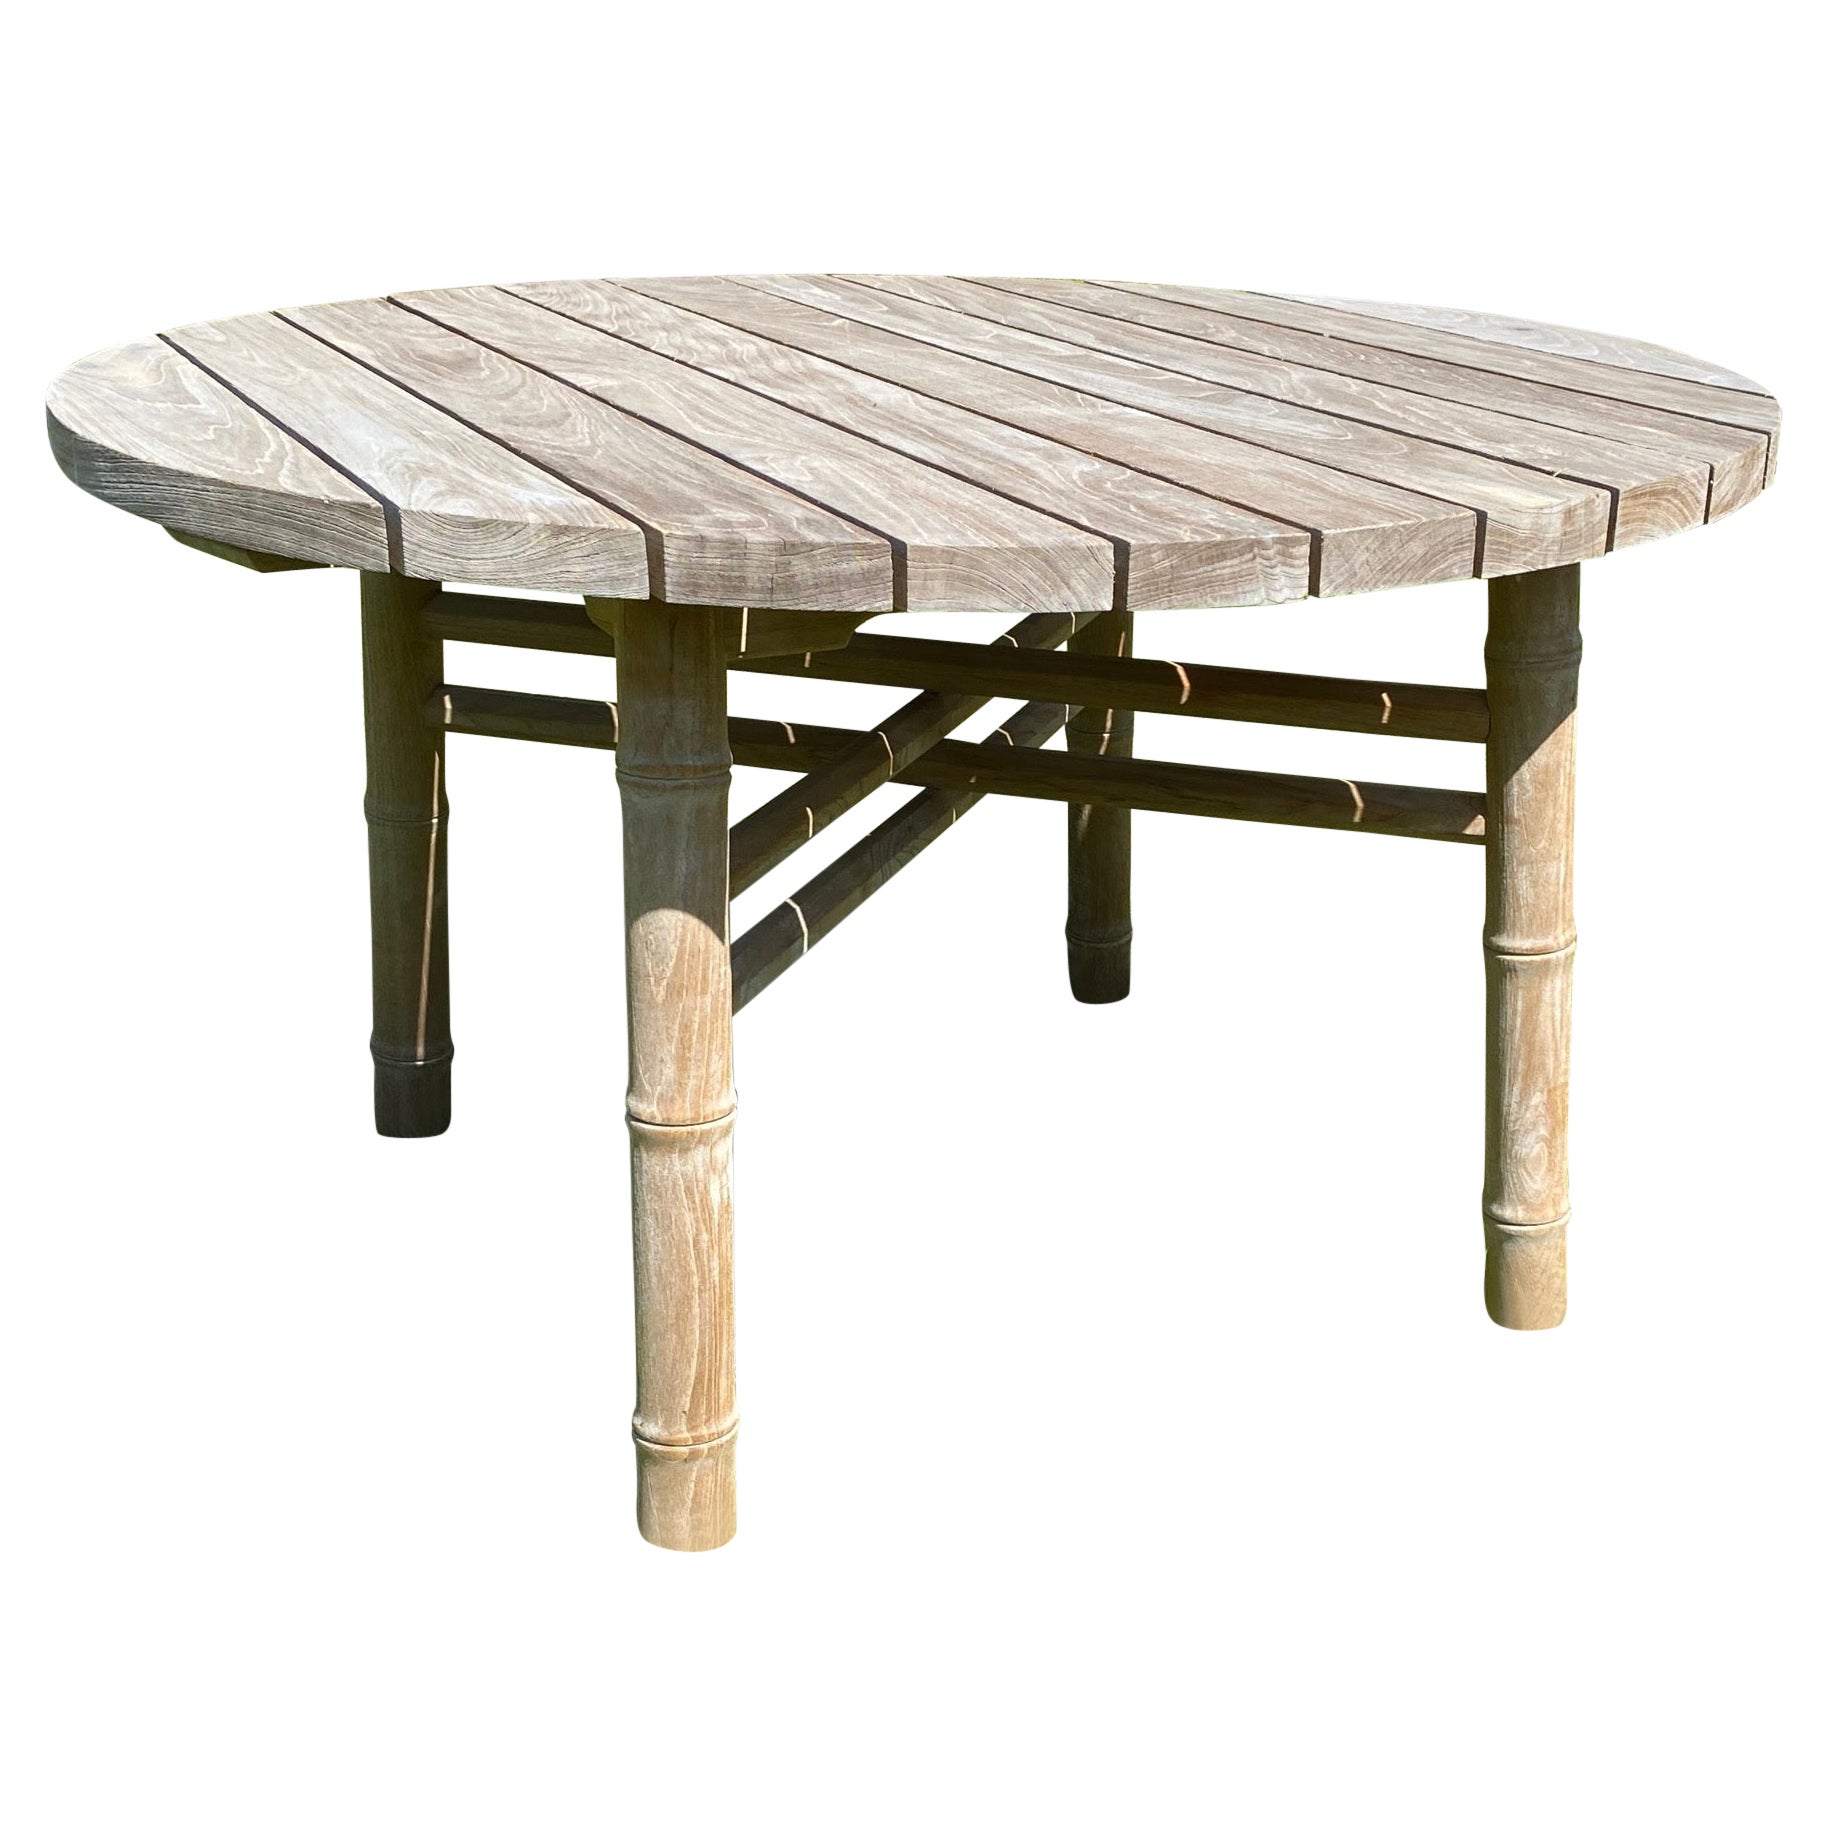 McGuire Faux Bamboo Teak Wood Garden Dining Table